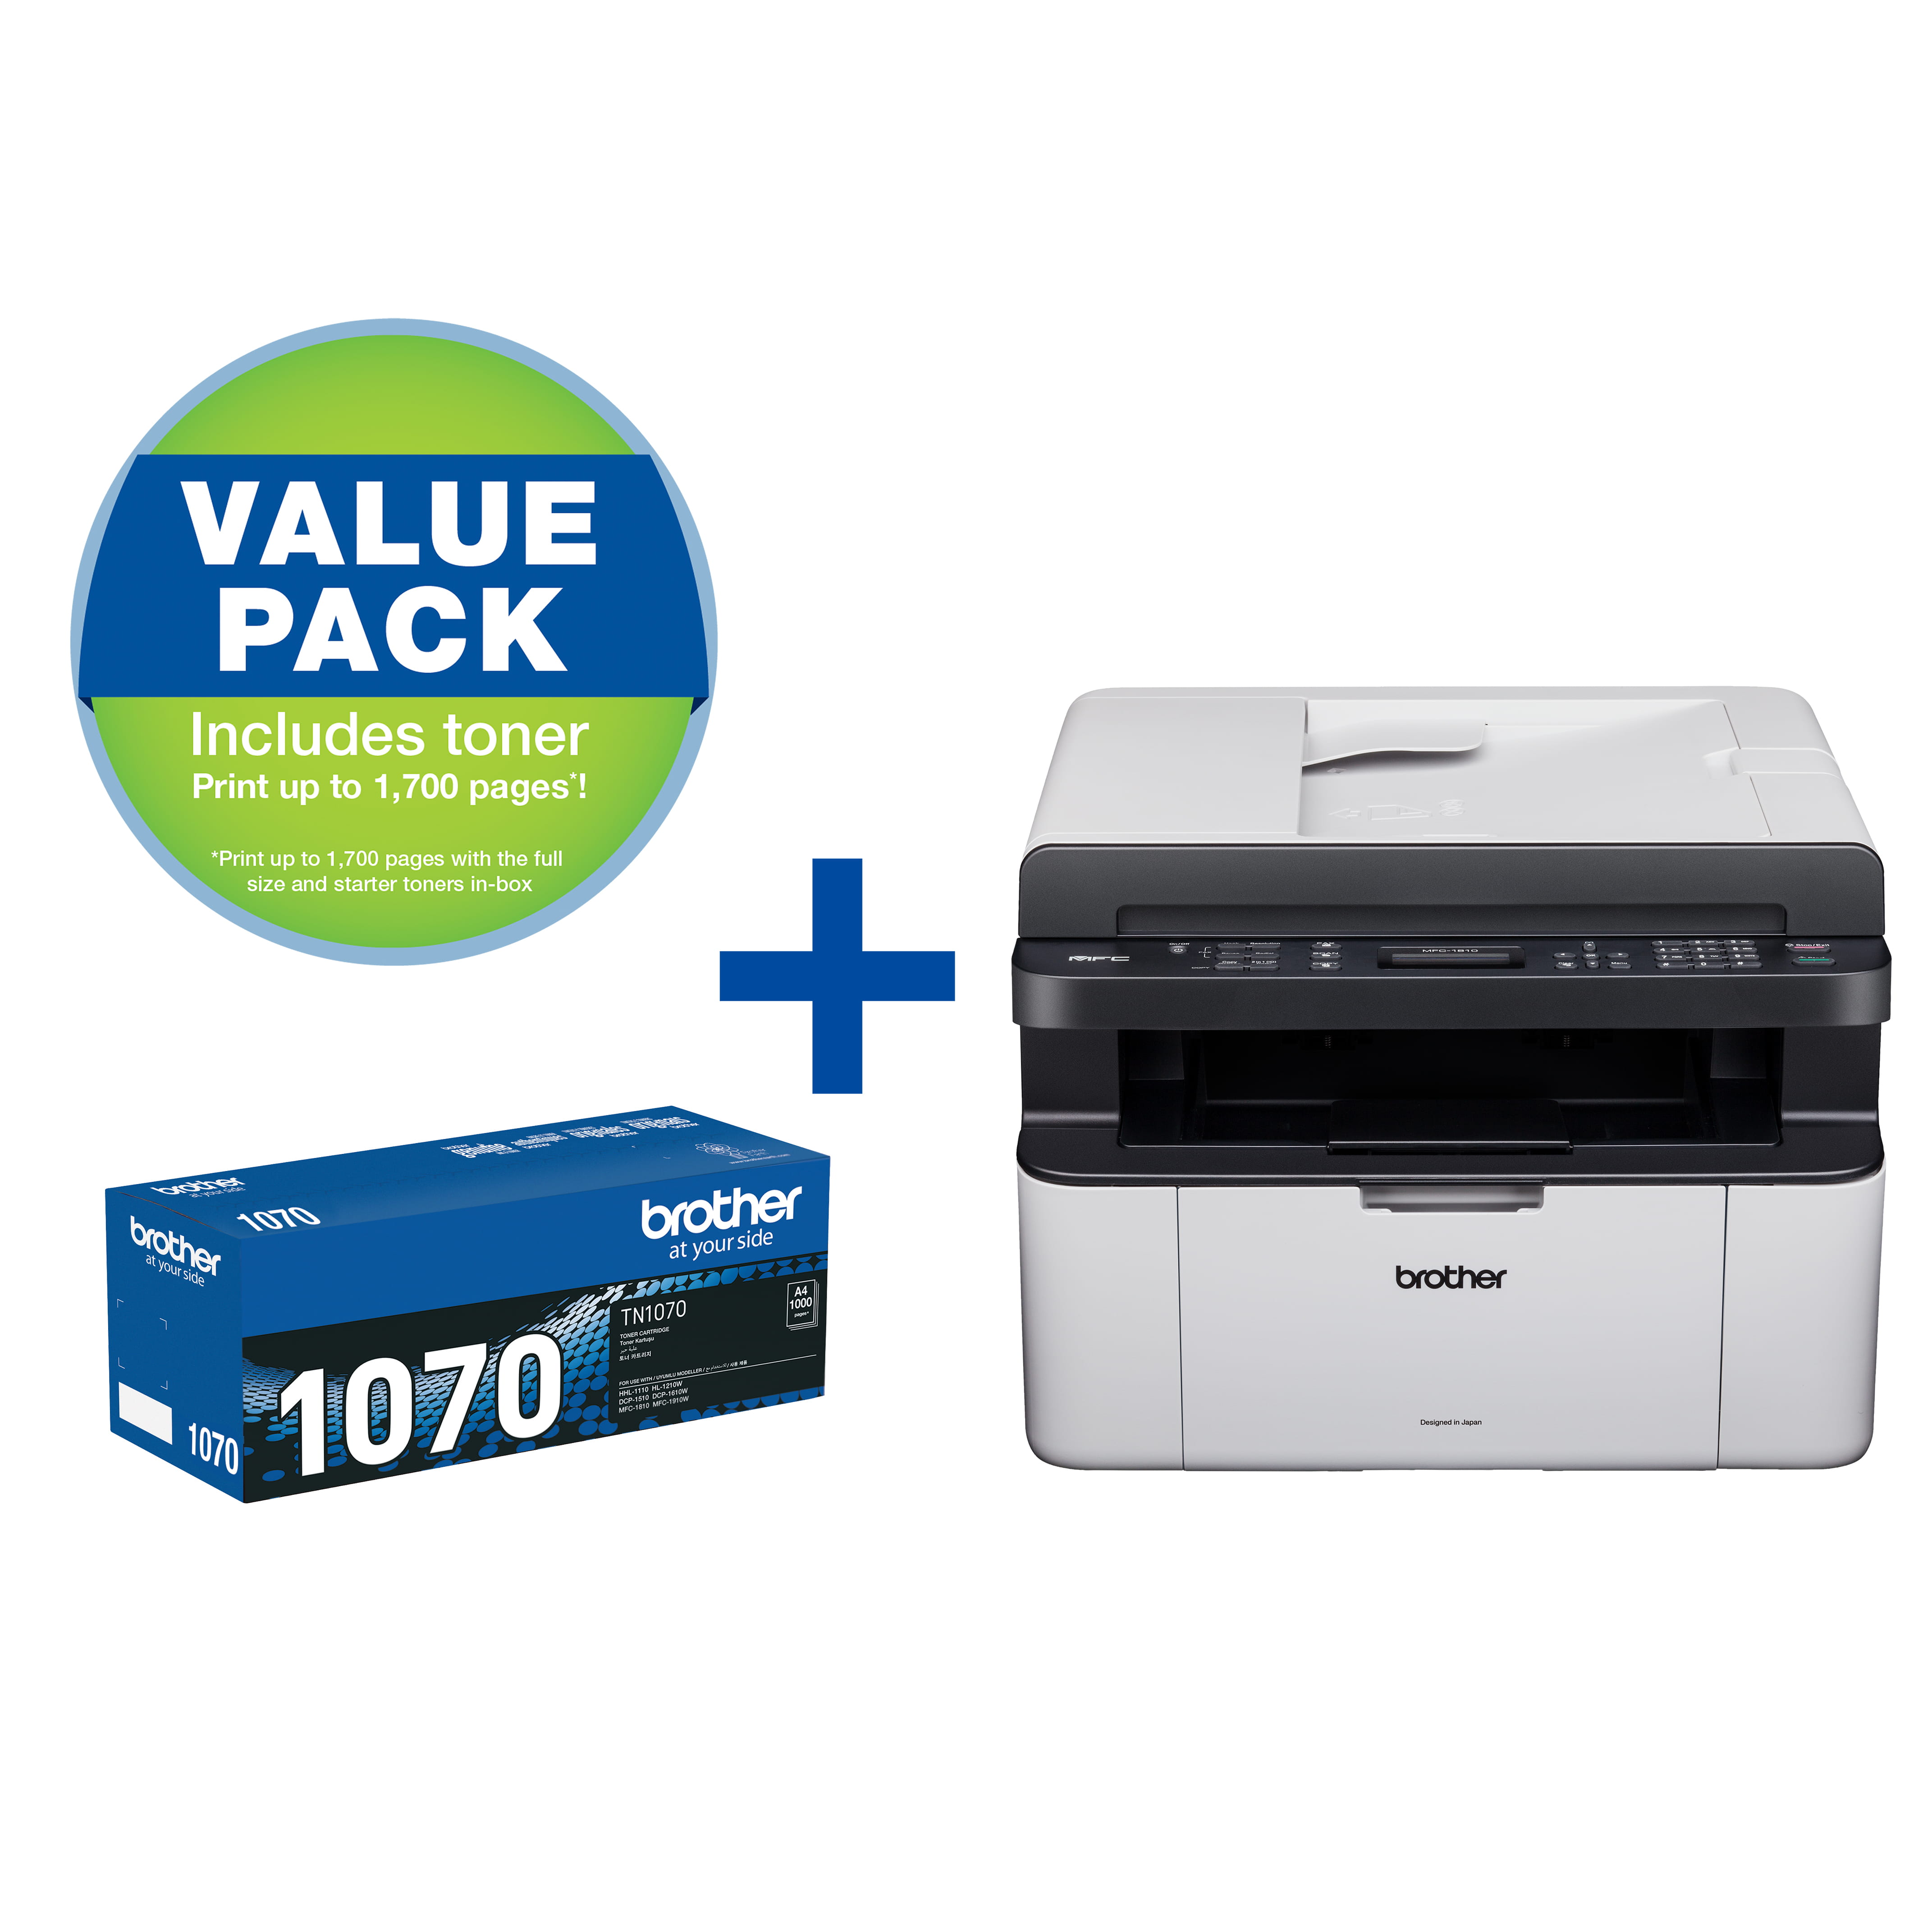 MFC-1810 with a full sized tn-1070 toner and a value pack icon